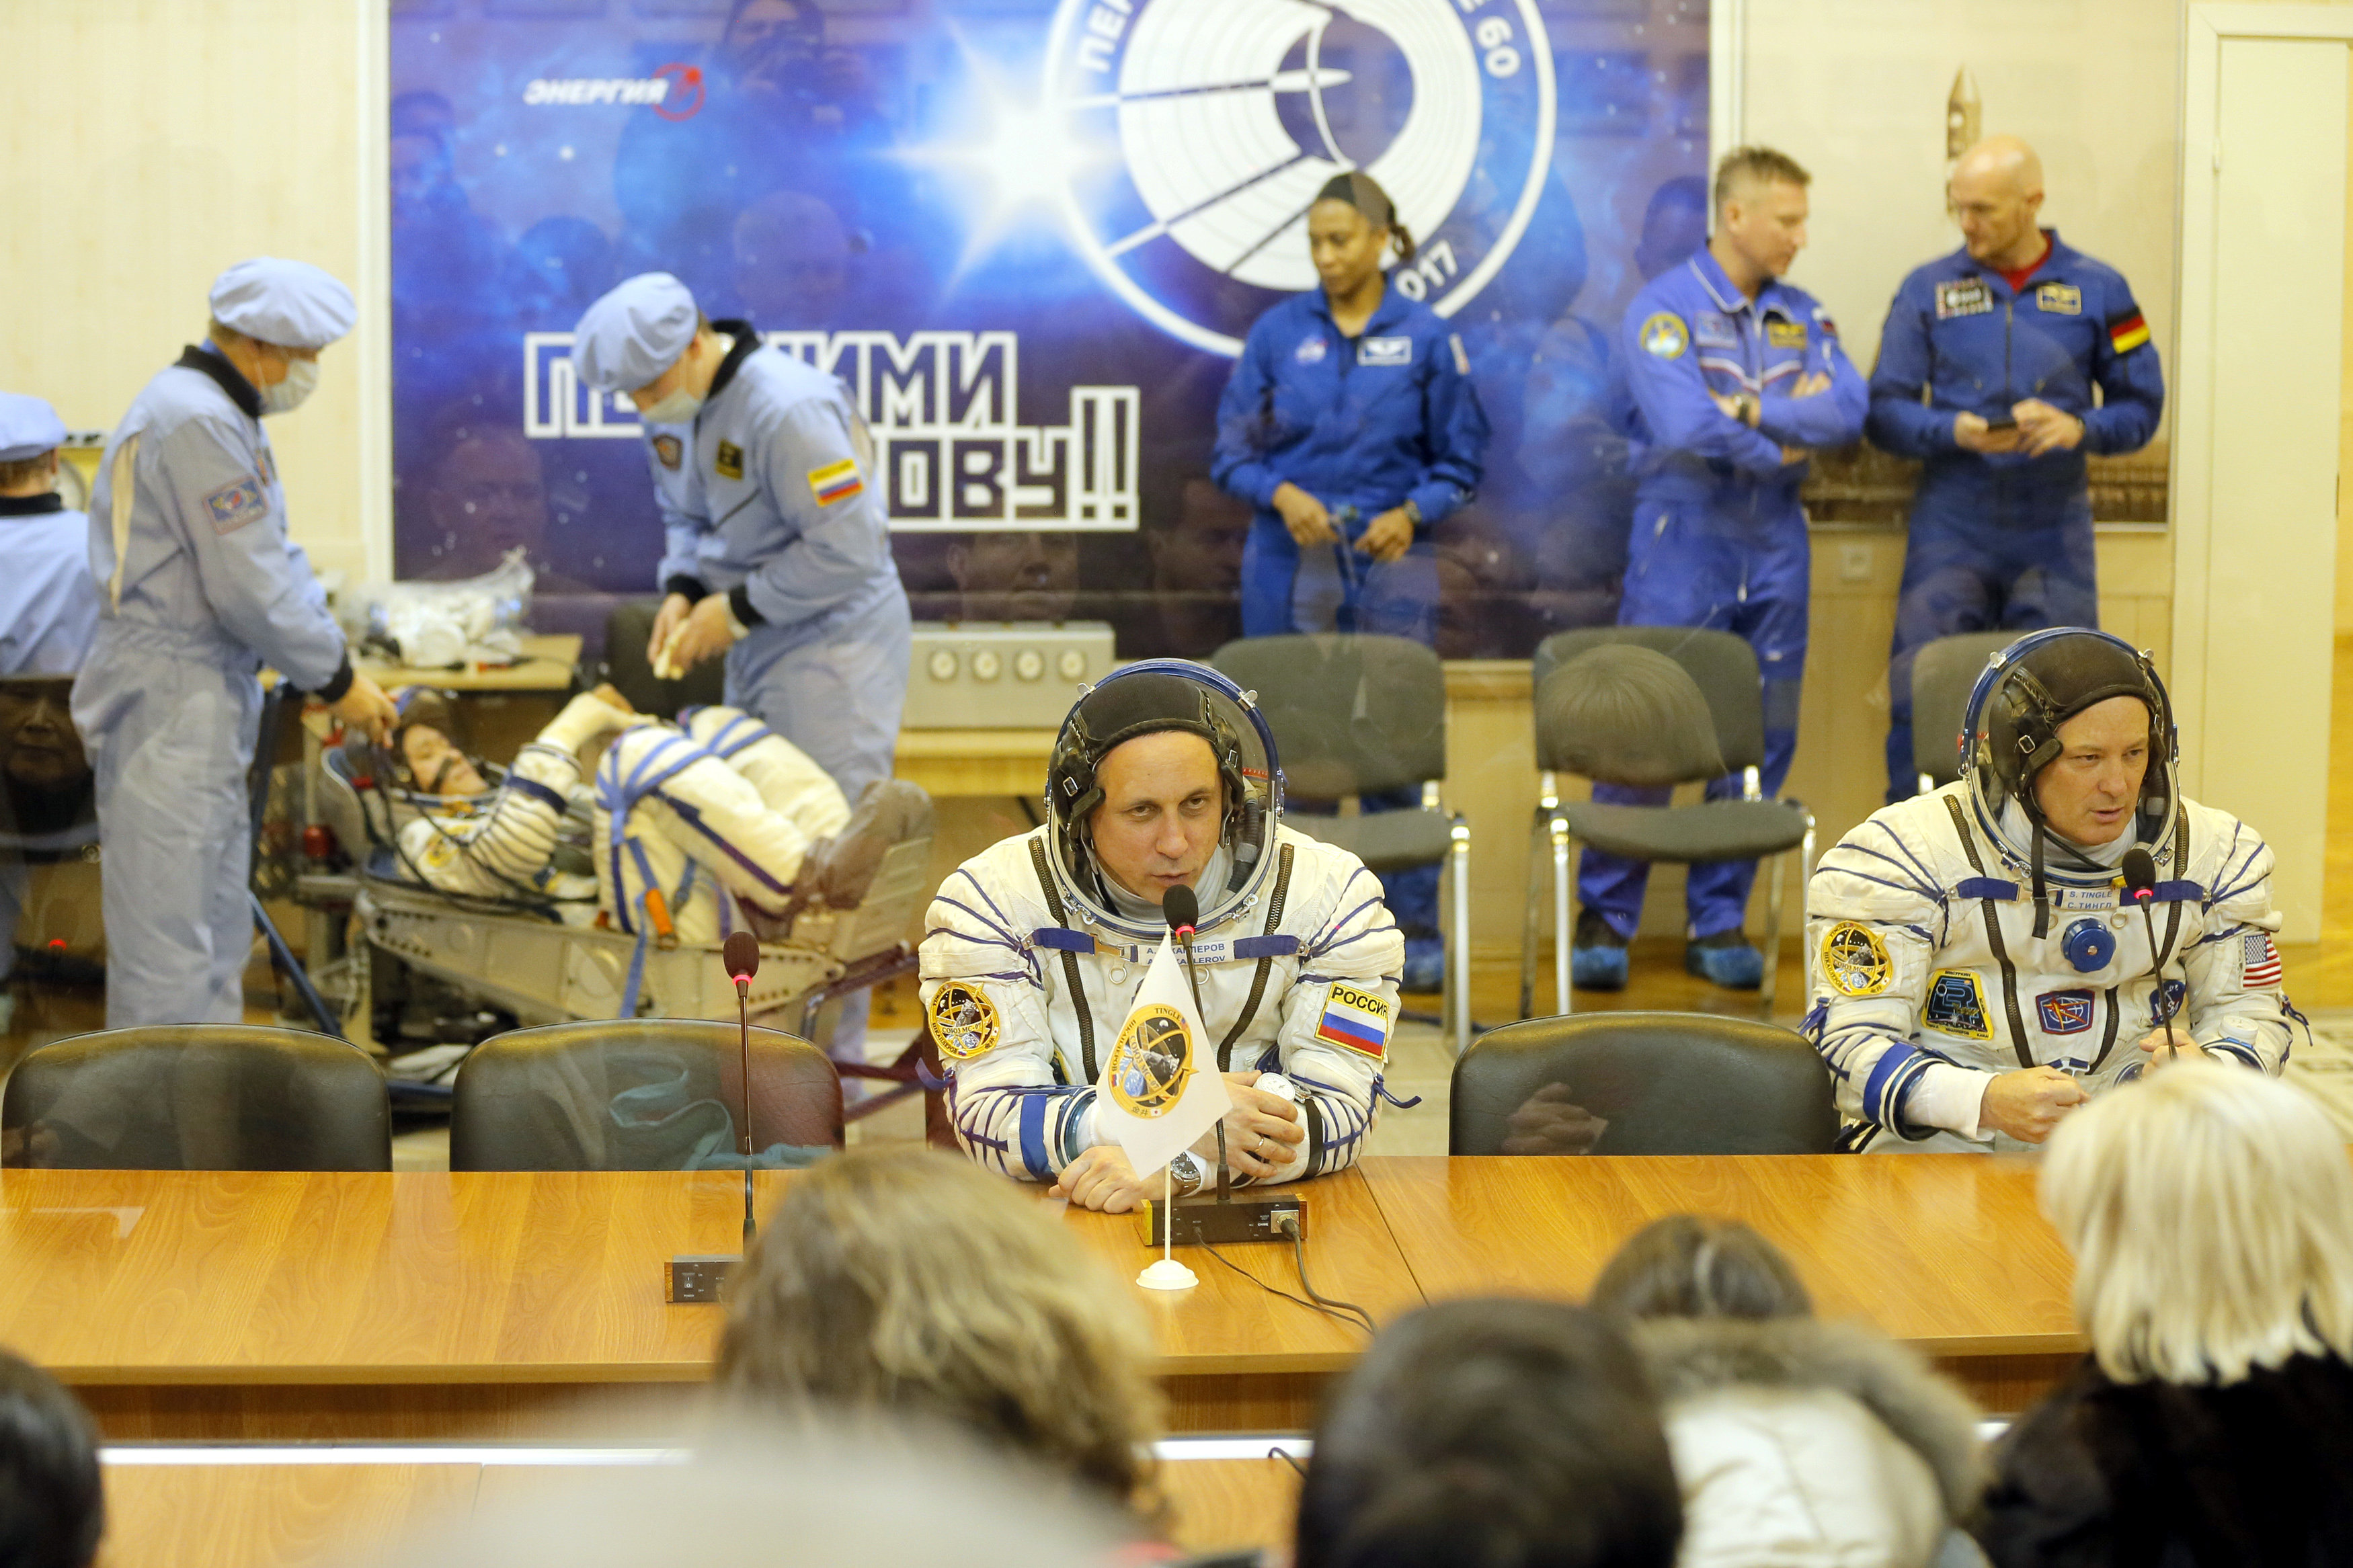 In pictures: U.S., Russian, Japanese crew blasts off for space station